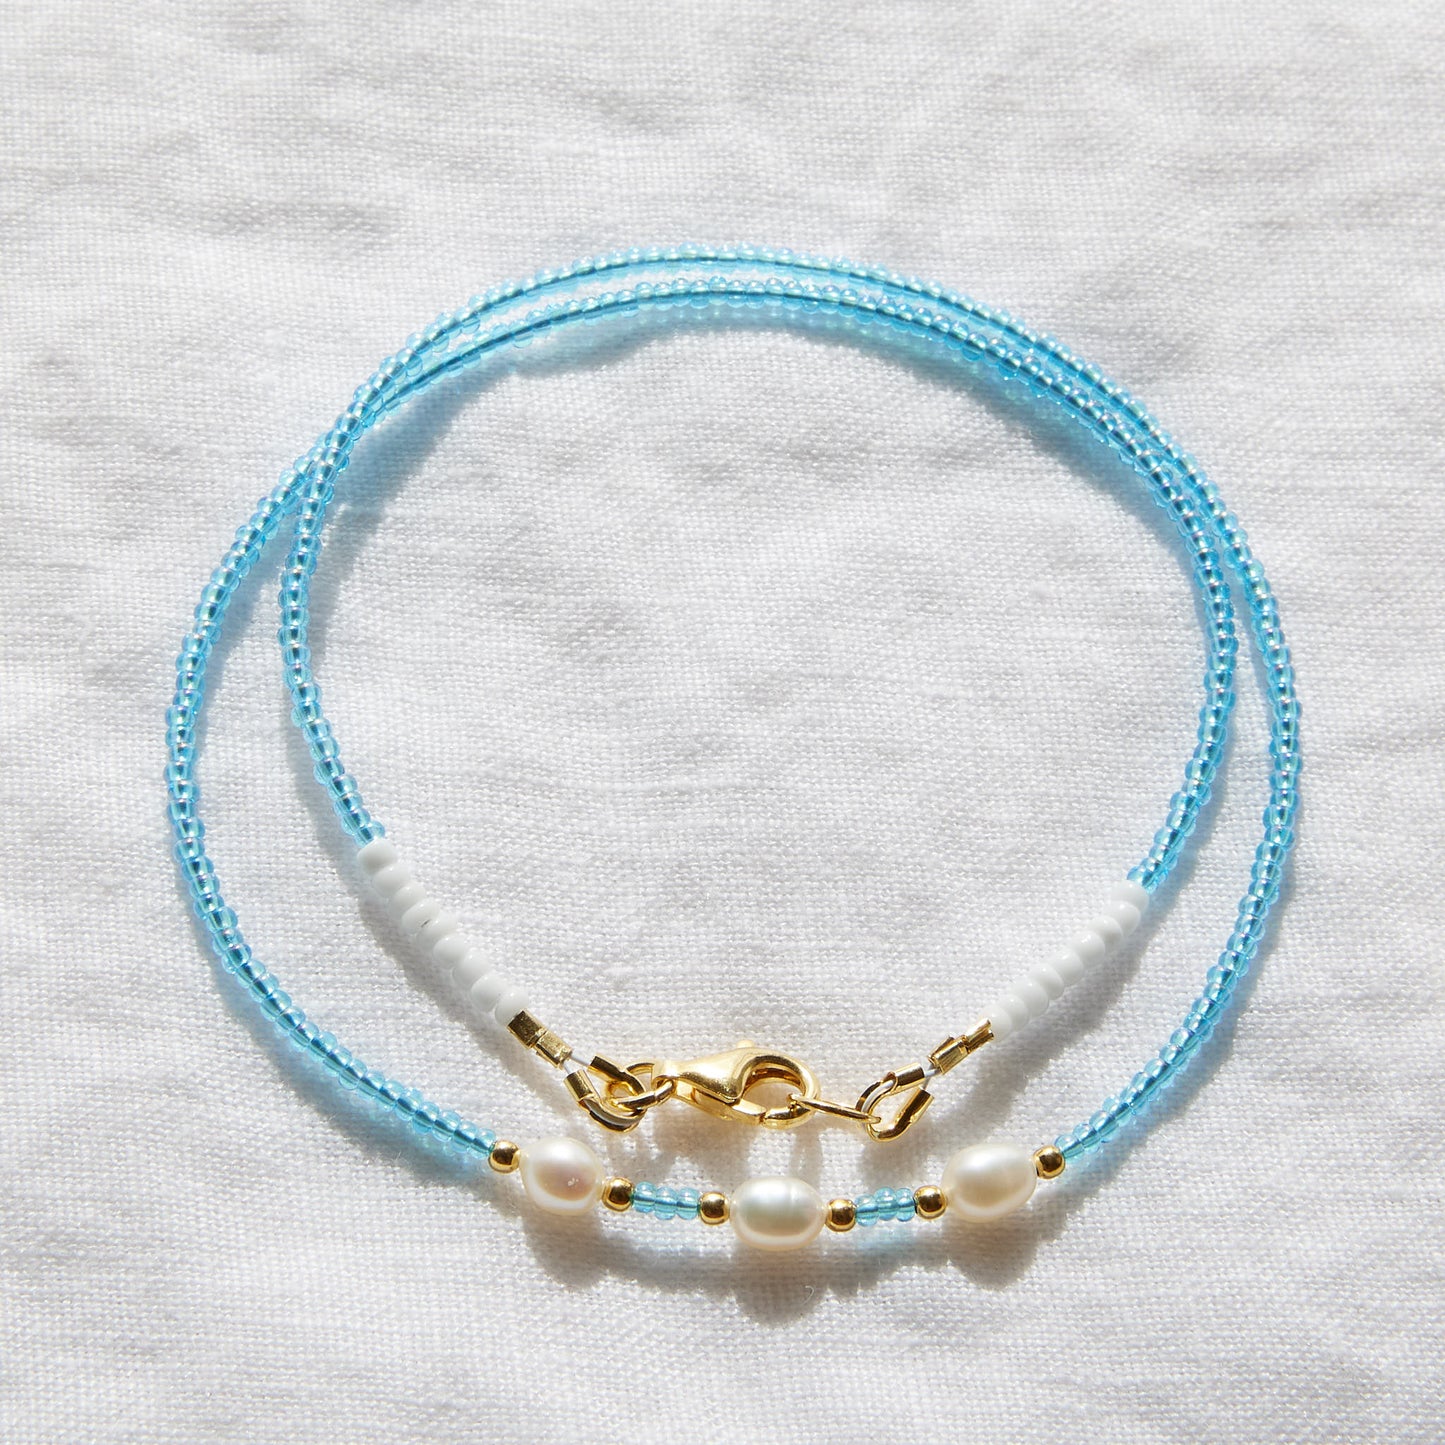 Rainbow sky blue beaded necklace with cultured freshwater pearls